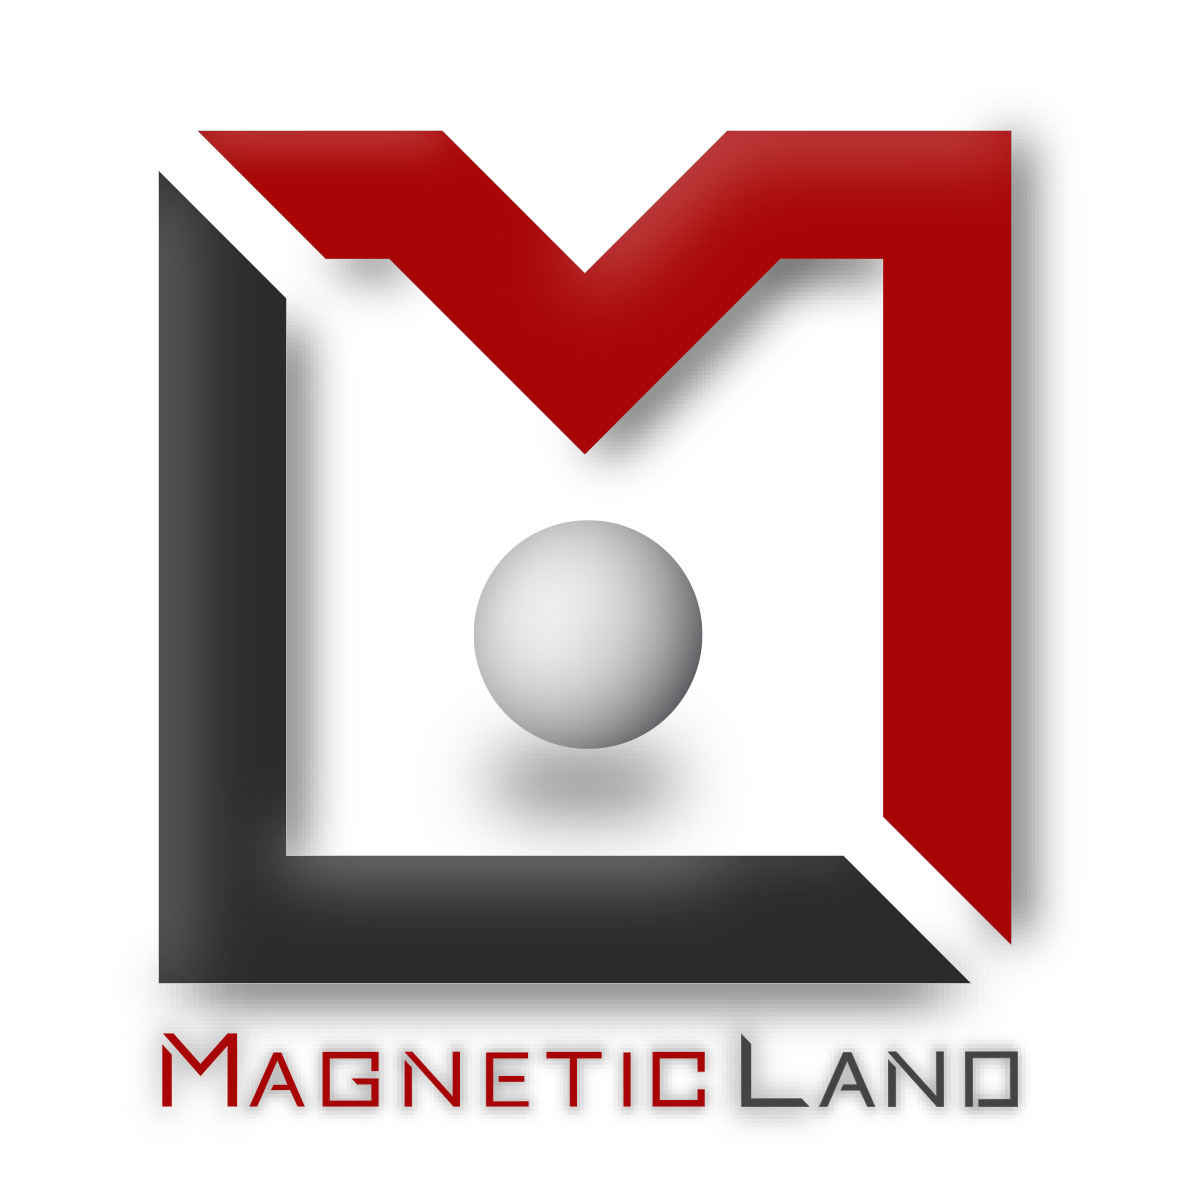 MAGNETICLAND